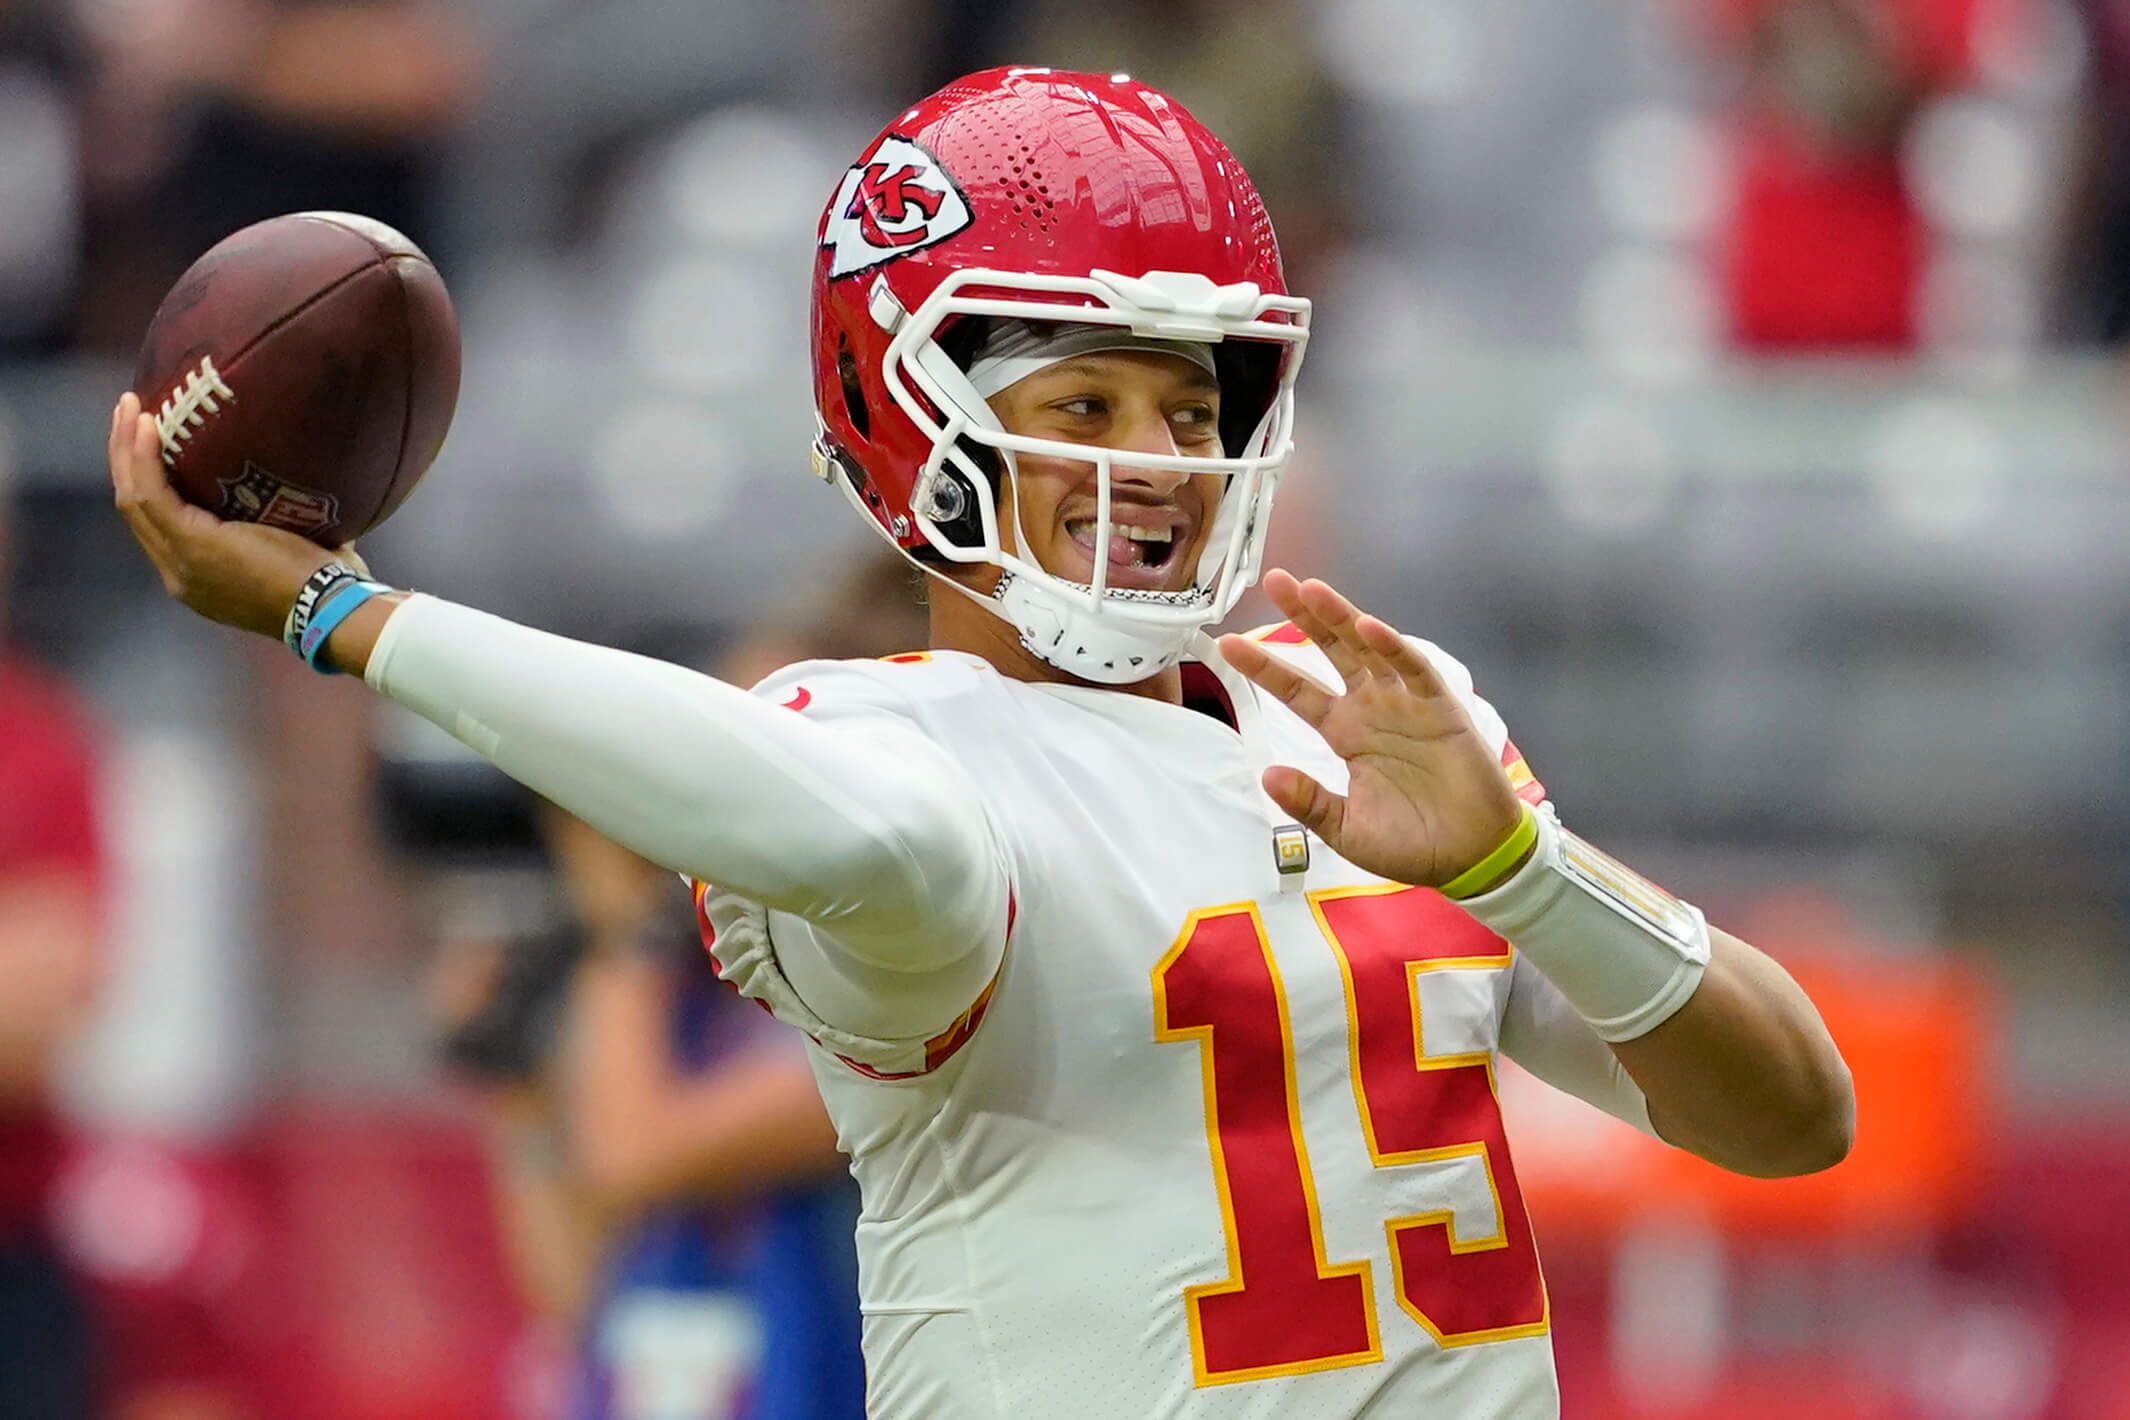 NFL Week 2 Chiefs vs Chargers: Thursday Night Football preview